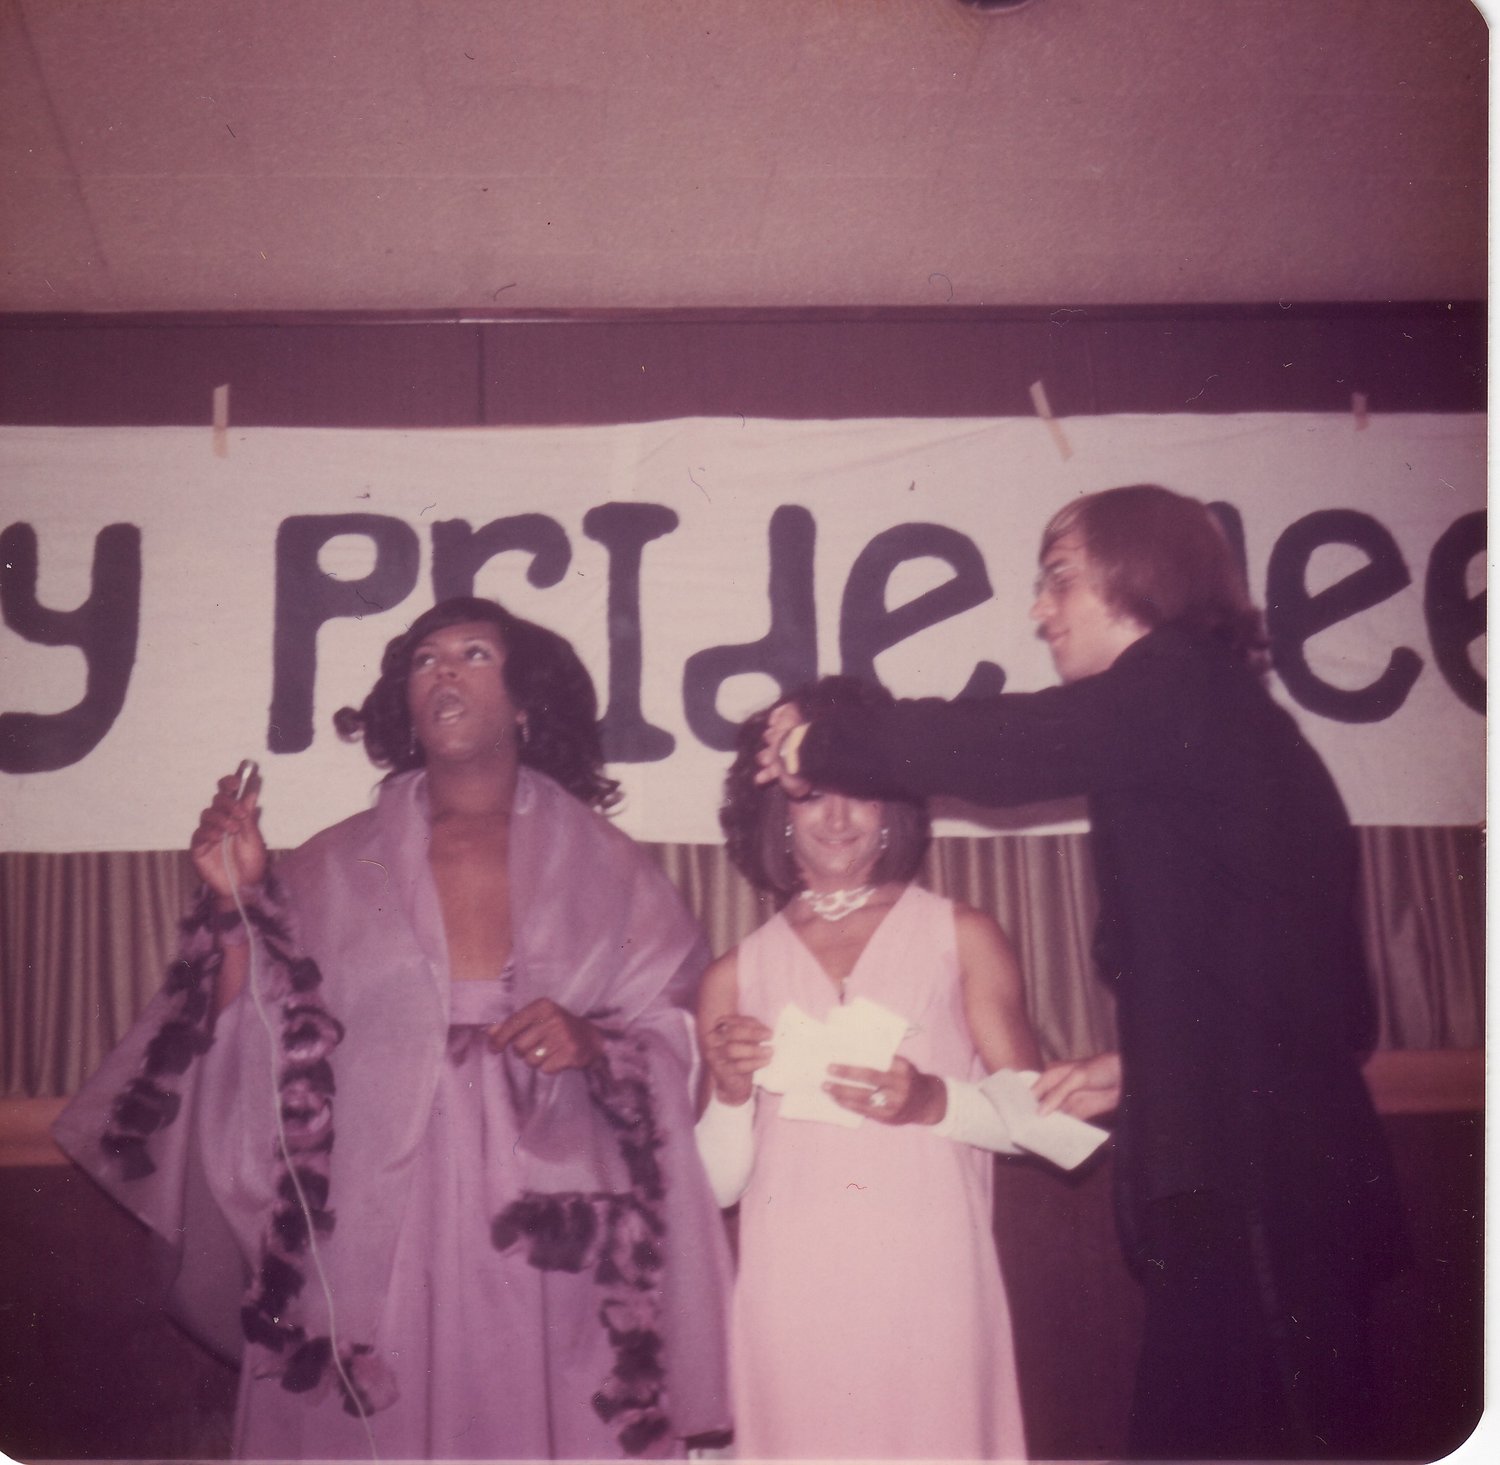 Nadine, a.k.a. John Schallberg, with Pattrice, a.k.a. Dan Vigliarolo and Alex McGehee at Joe Covello’s club in Lansing, June 22, 1972. From private collection of Greg Kamm.